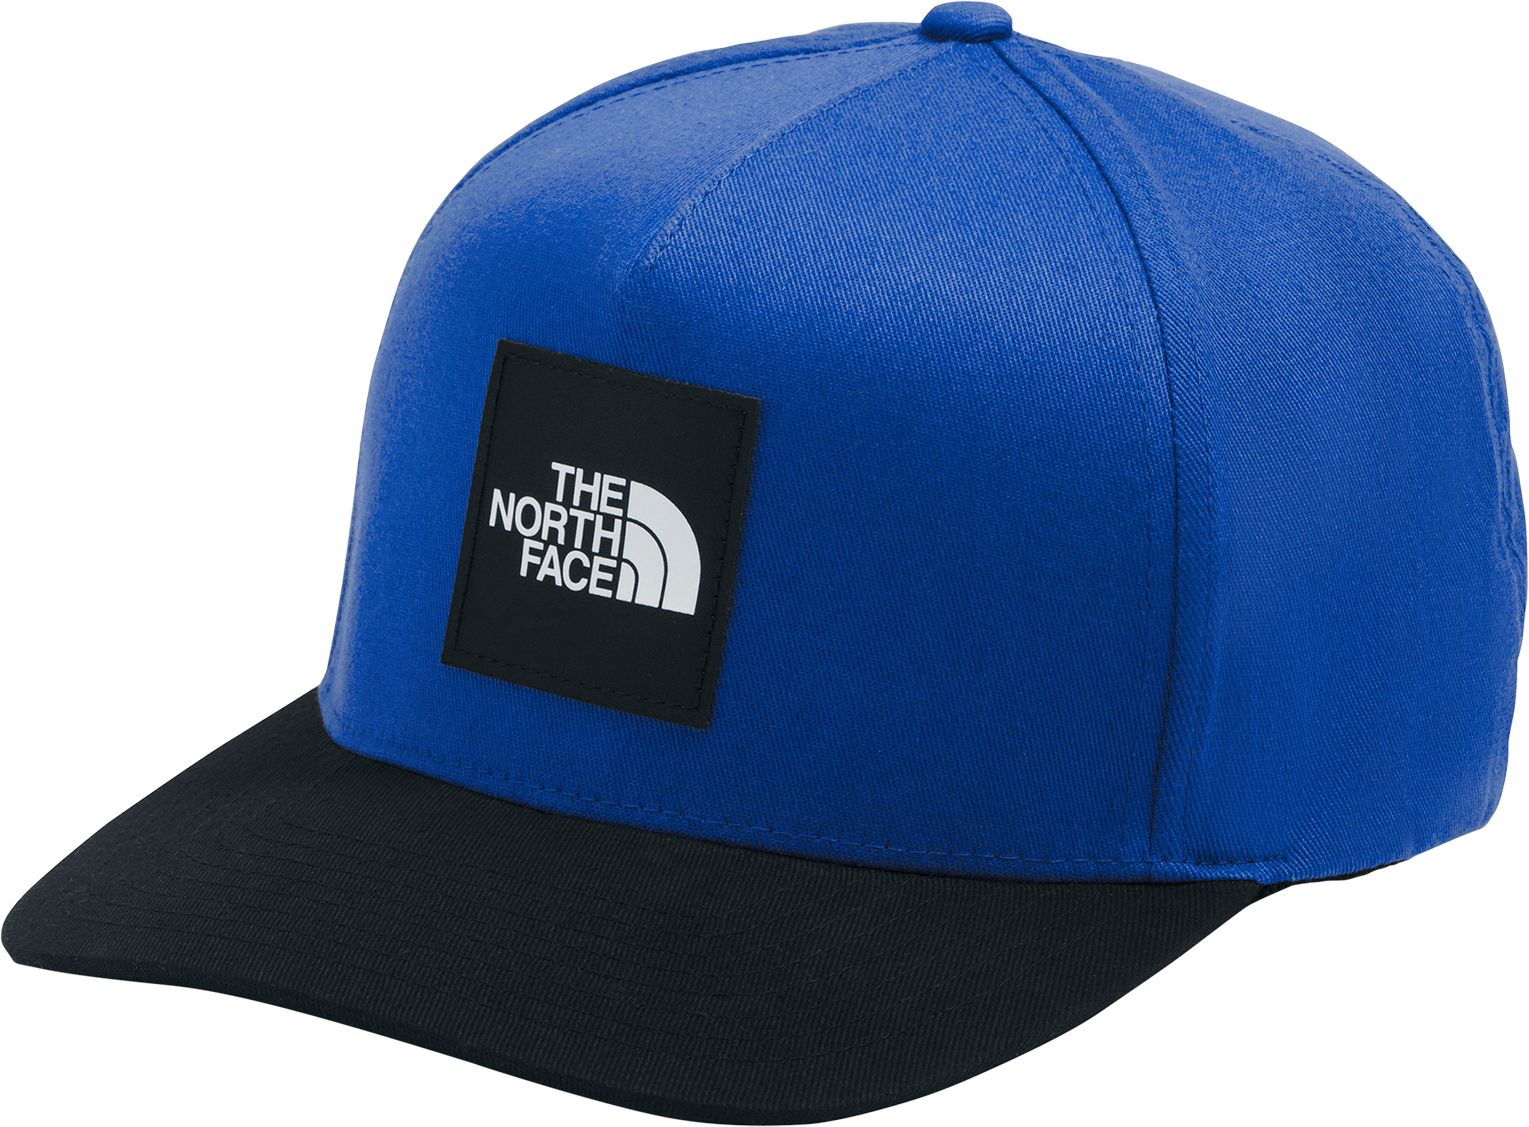 north face keep it structured hat